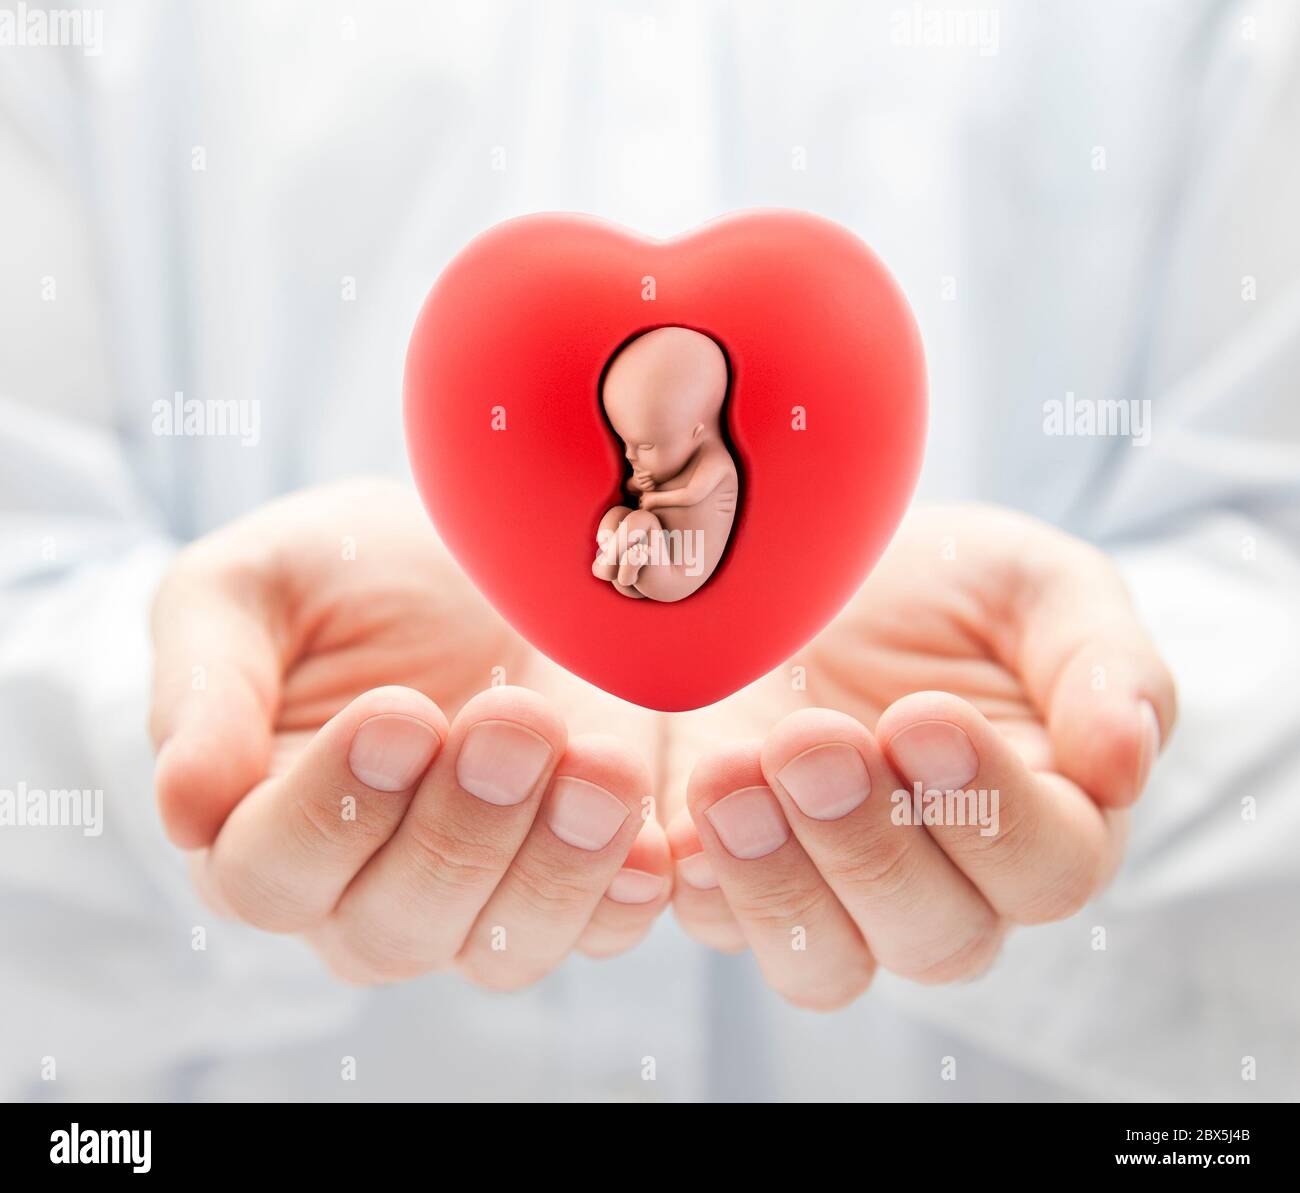 Human embryo in red heart on hands Stock Photo